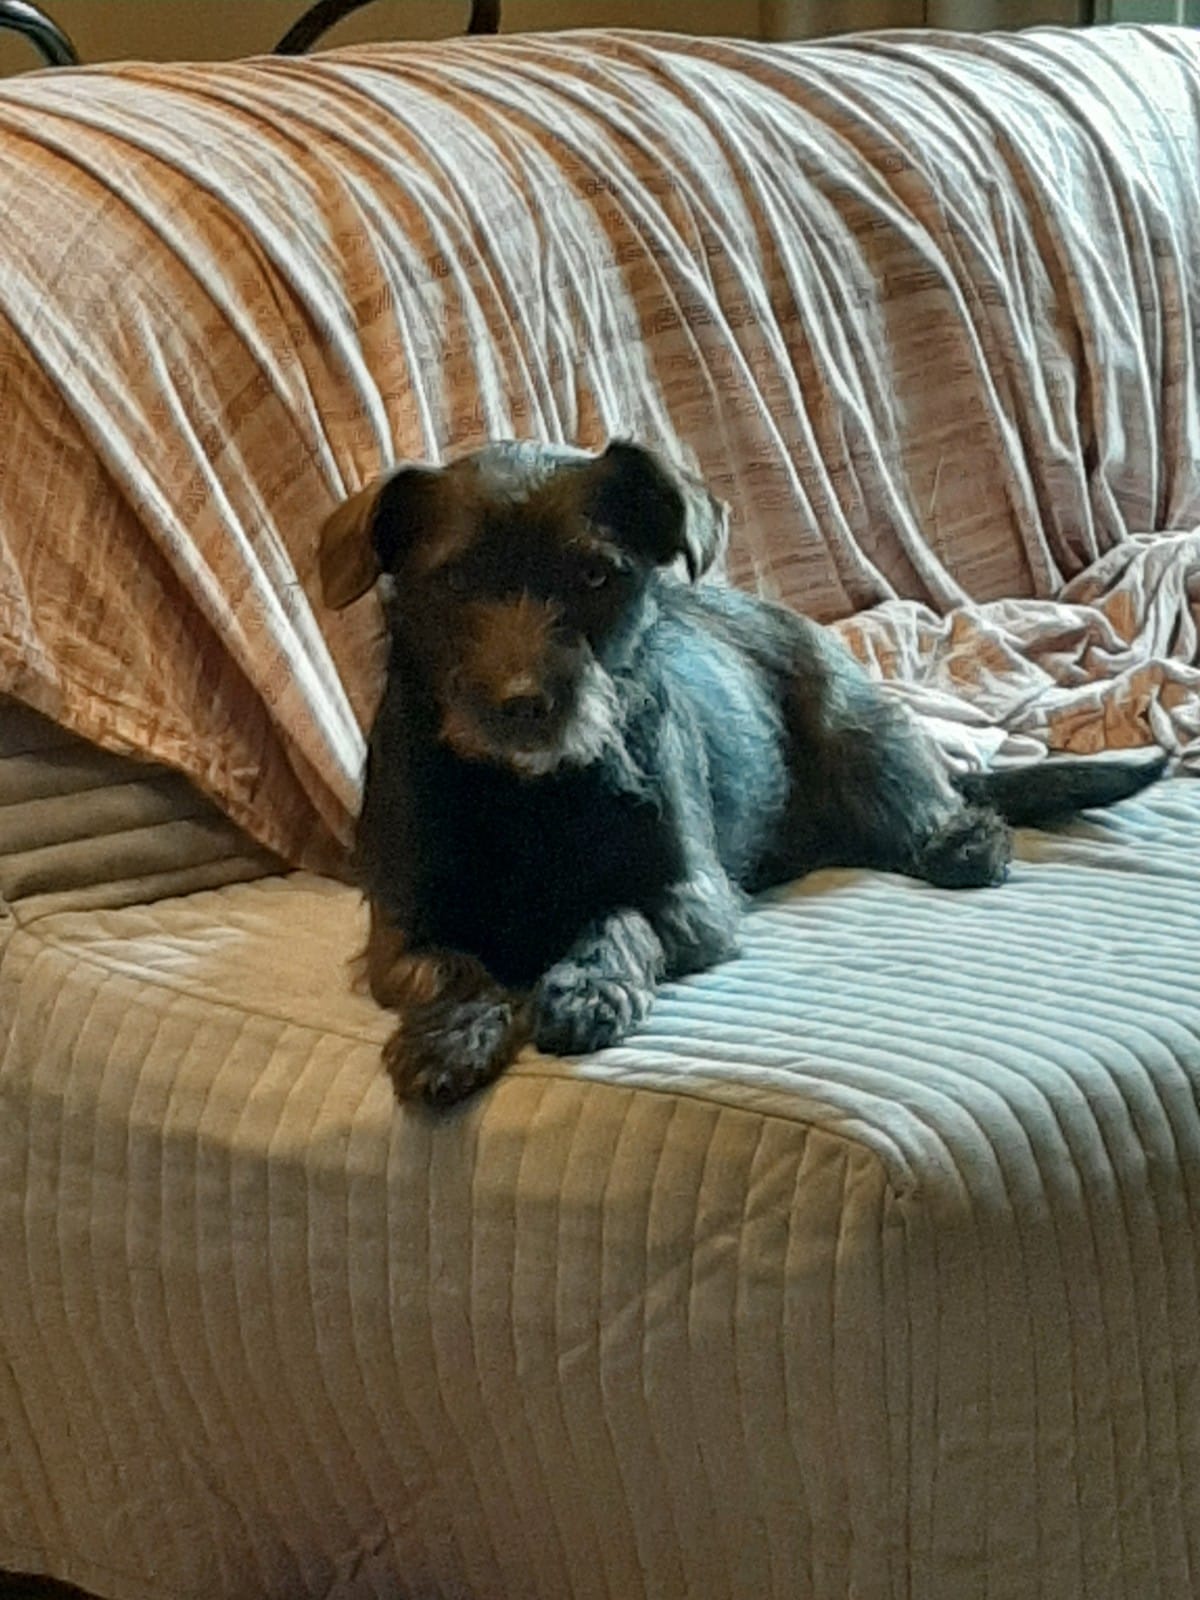 Winnie, a small black dog with long and dishevelled hair, looks to the camera as she sits in a couch.